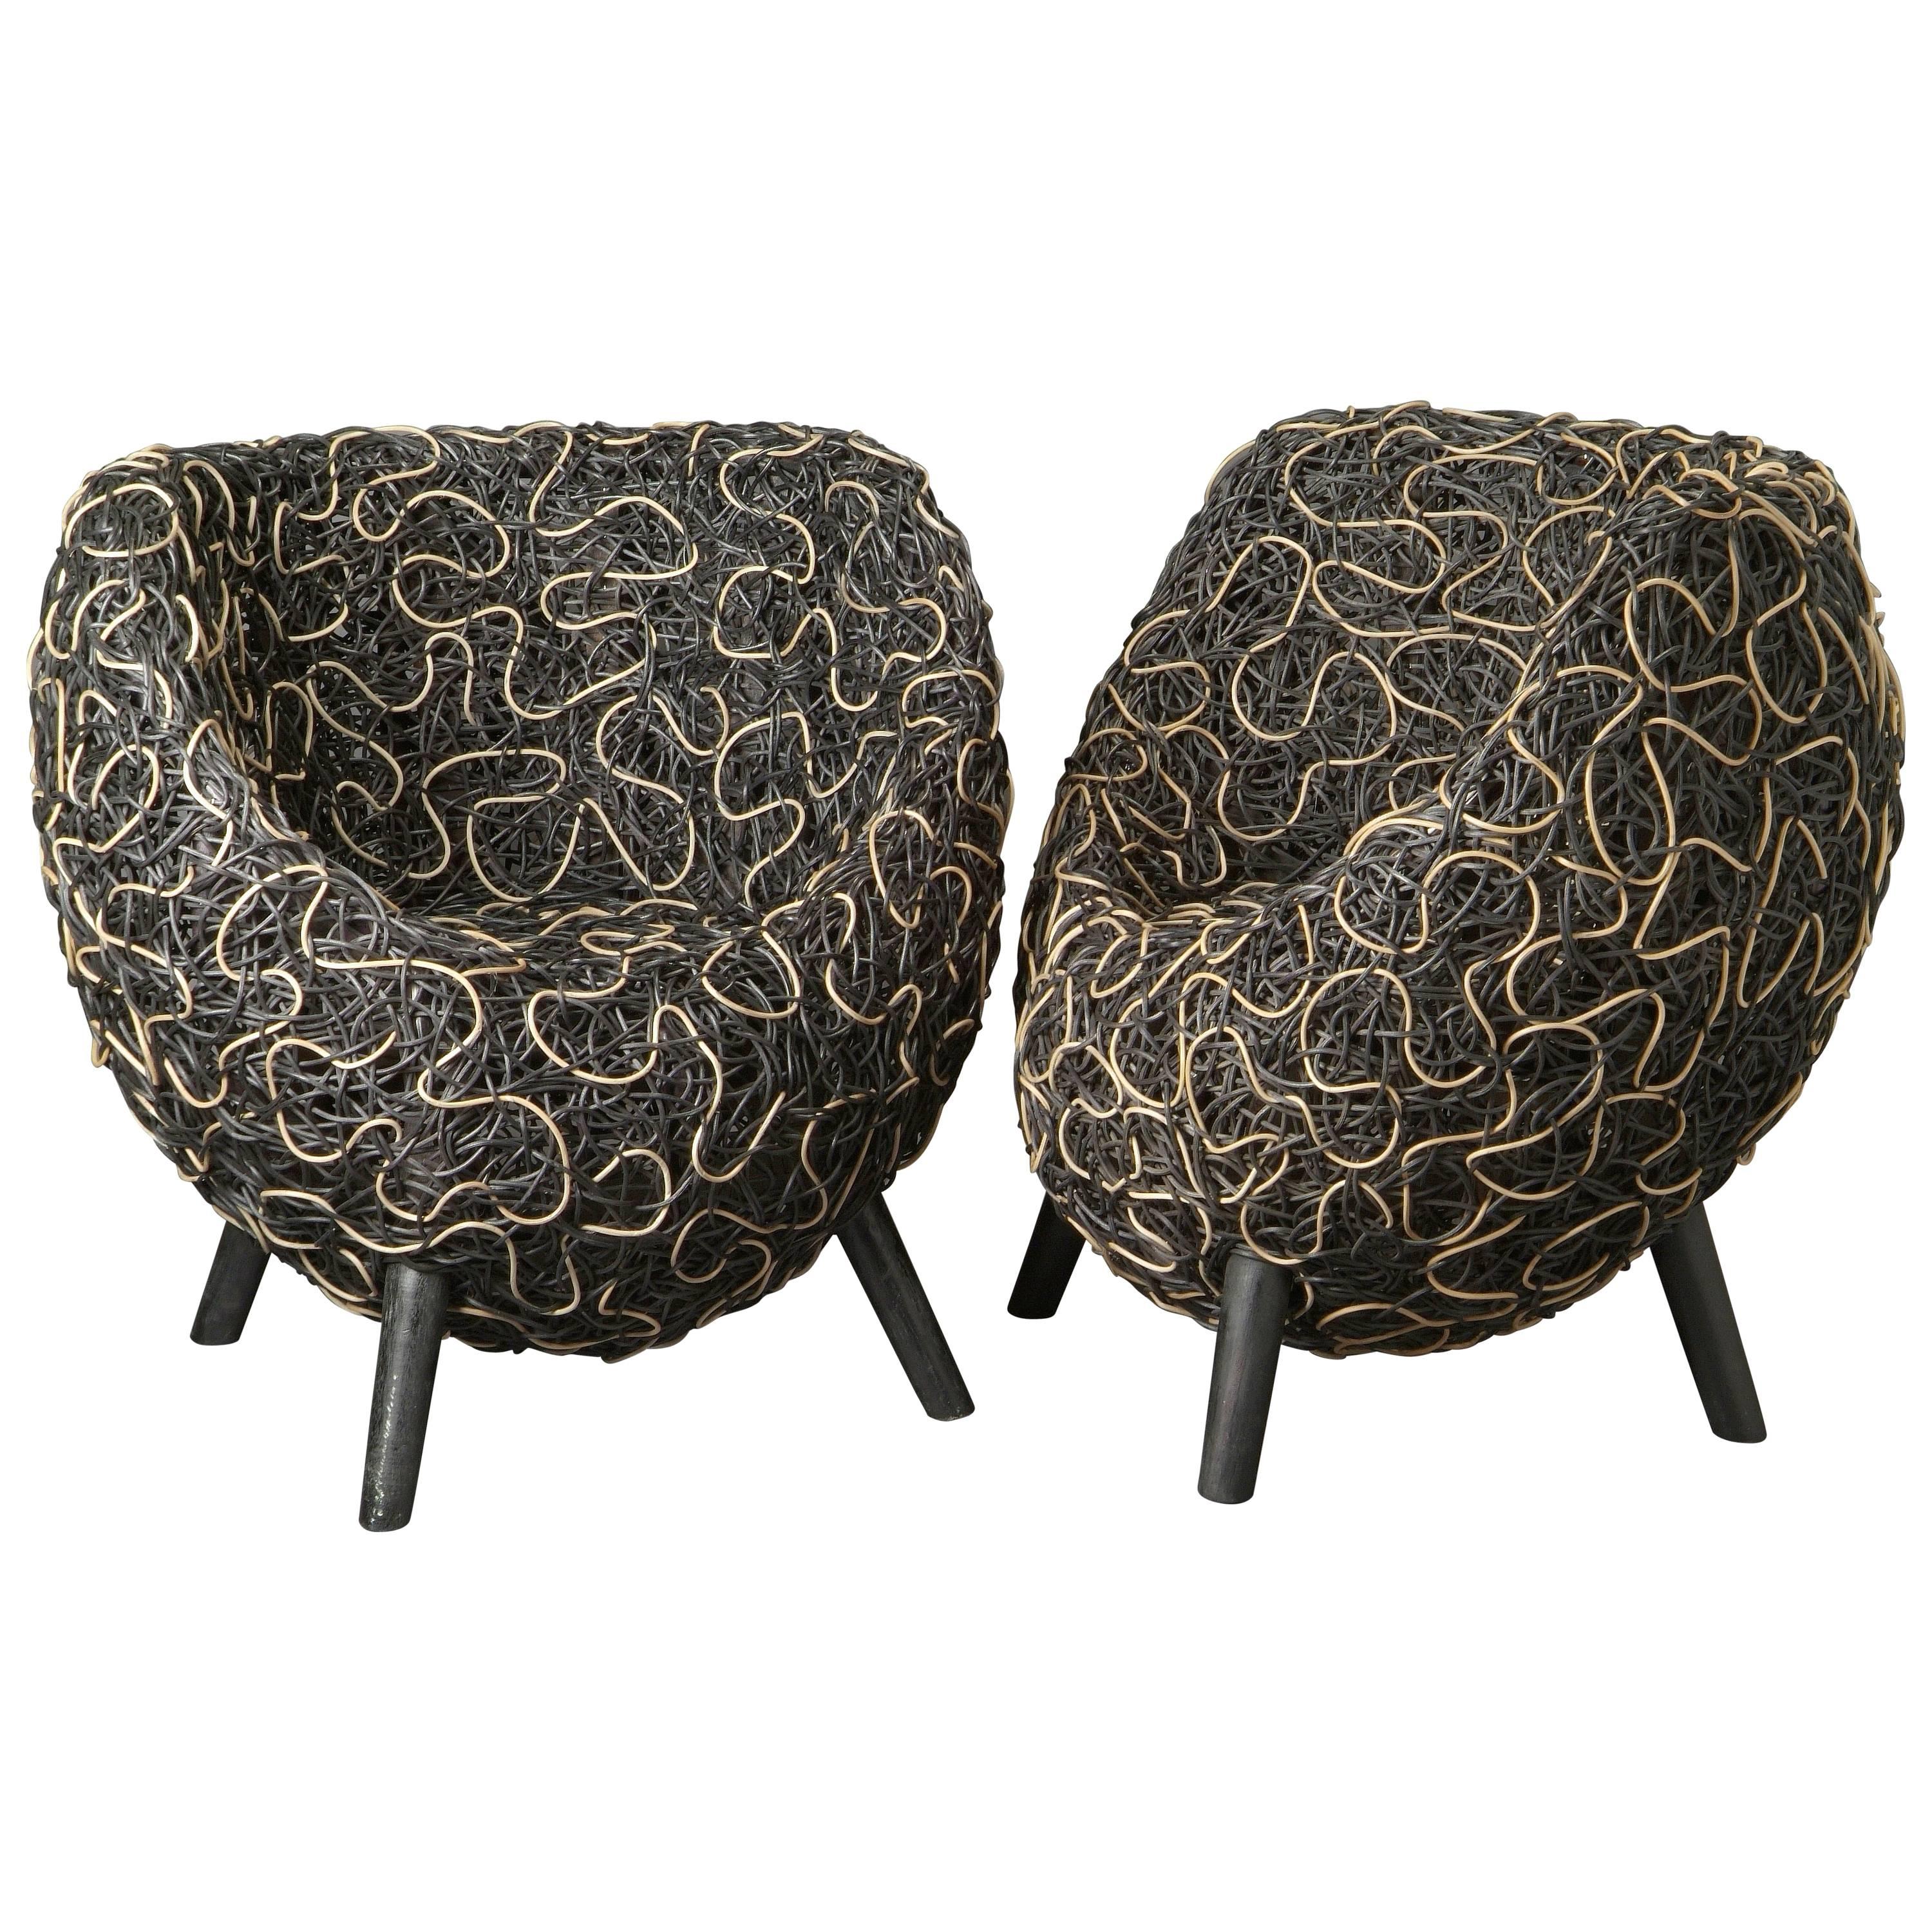 Pair of Seats in Natural and Black Lacquered Wicker, France, 1940s For Sale